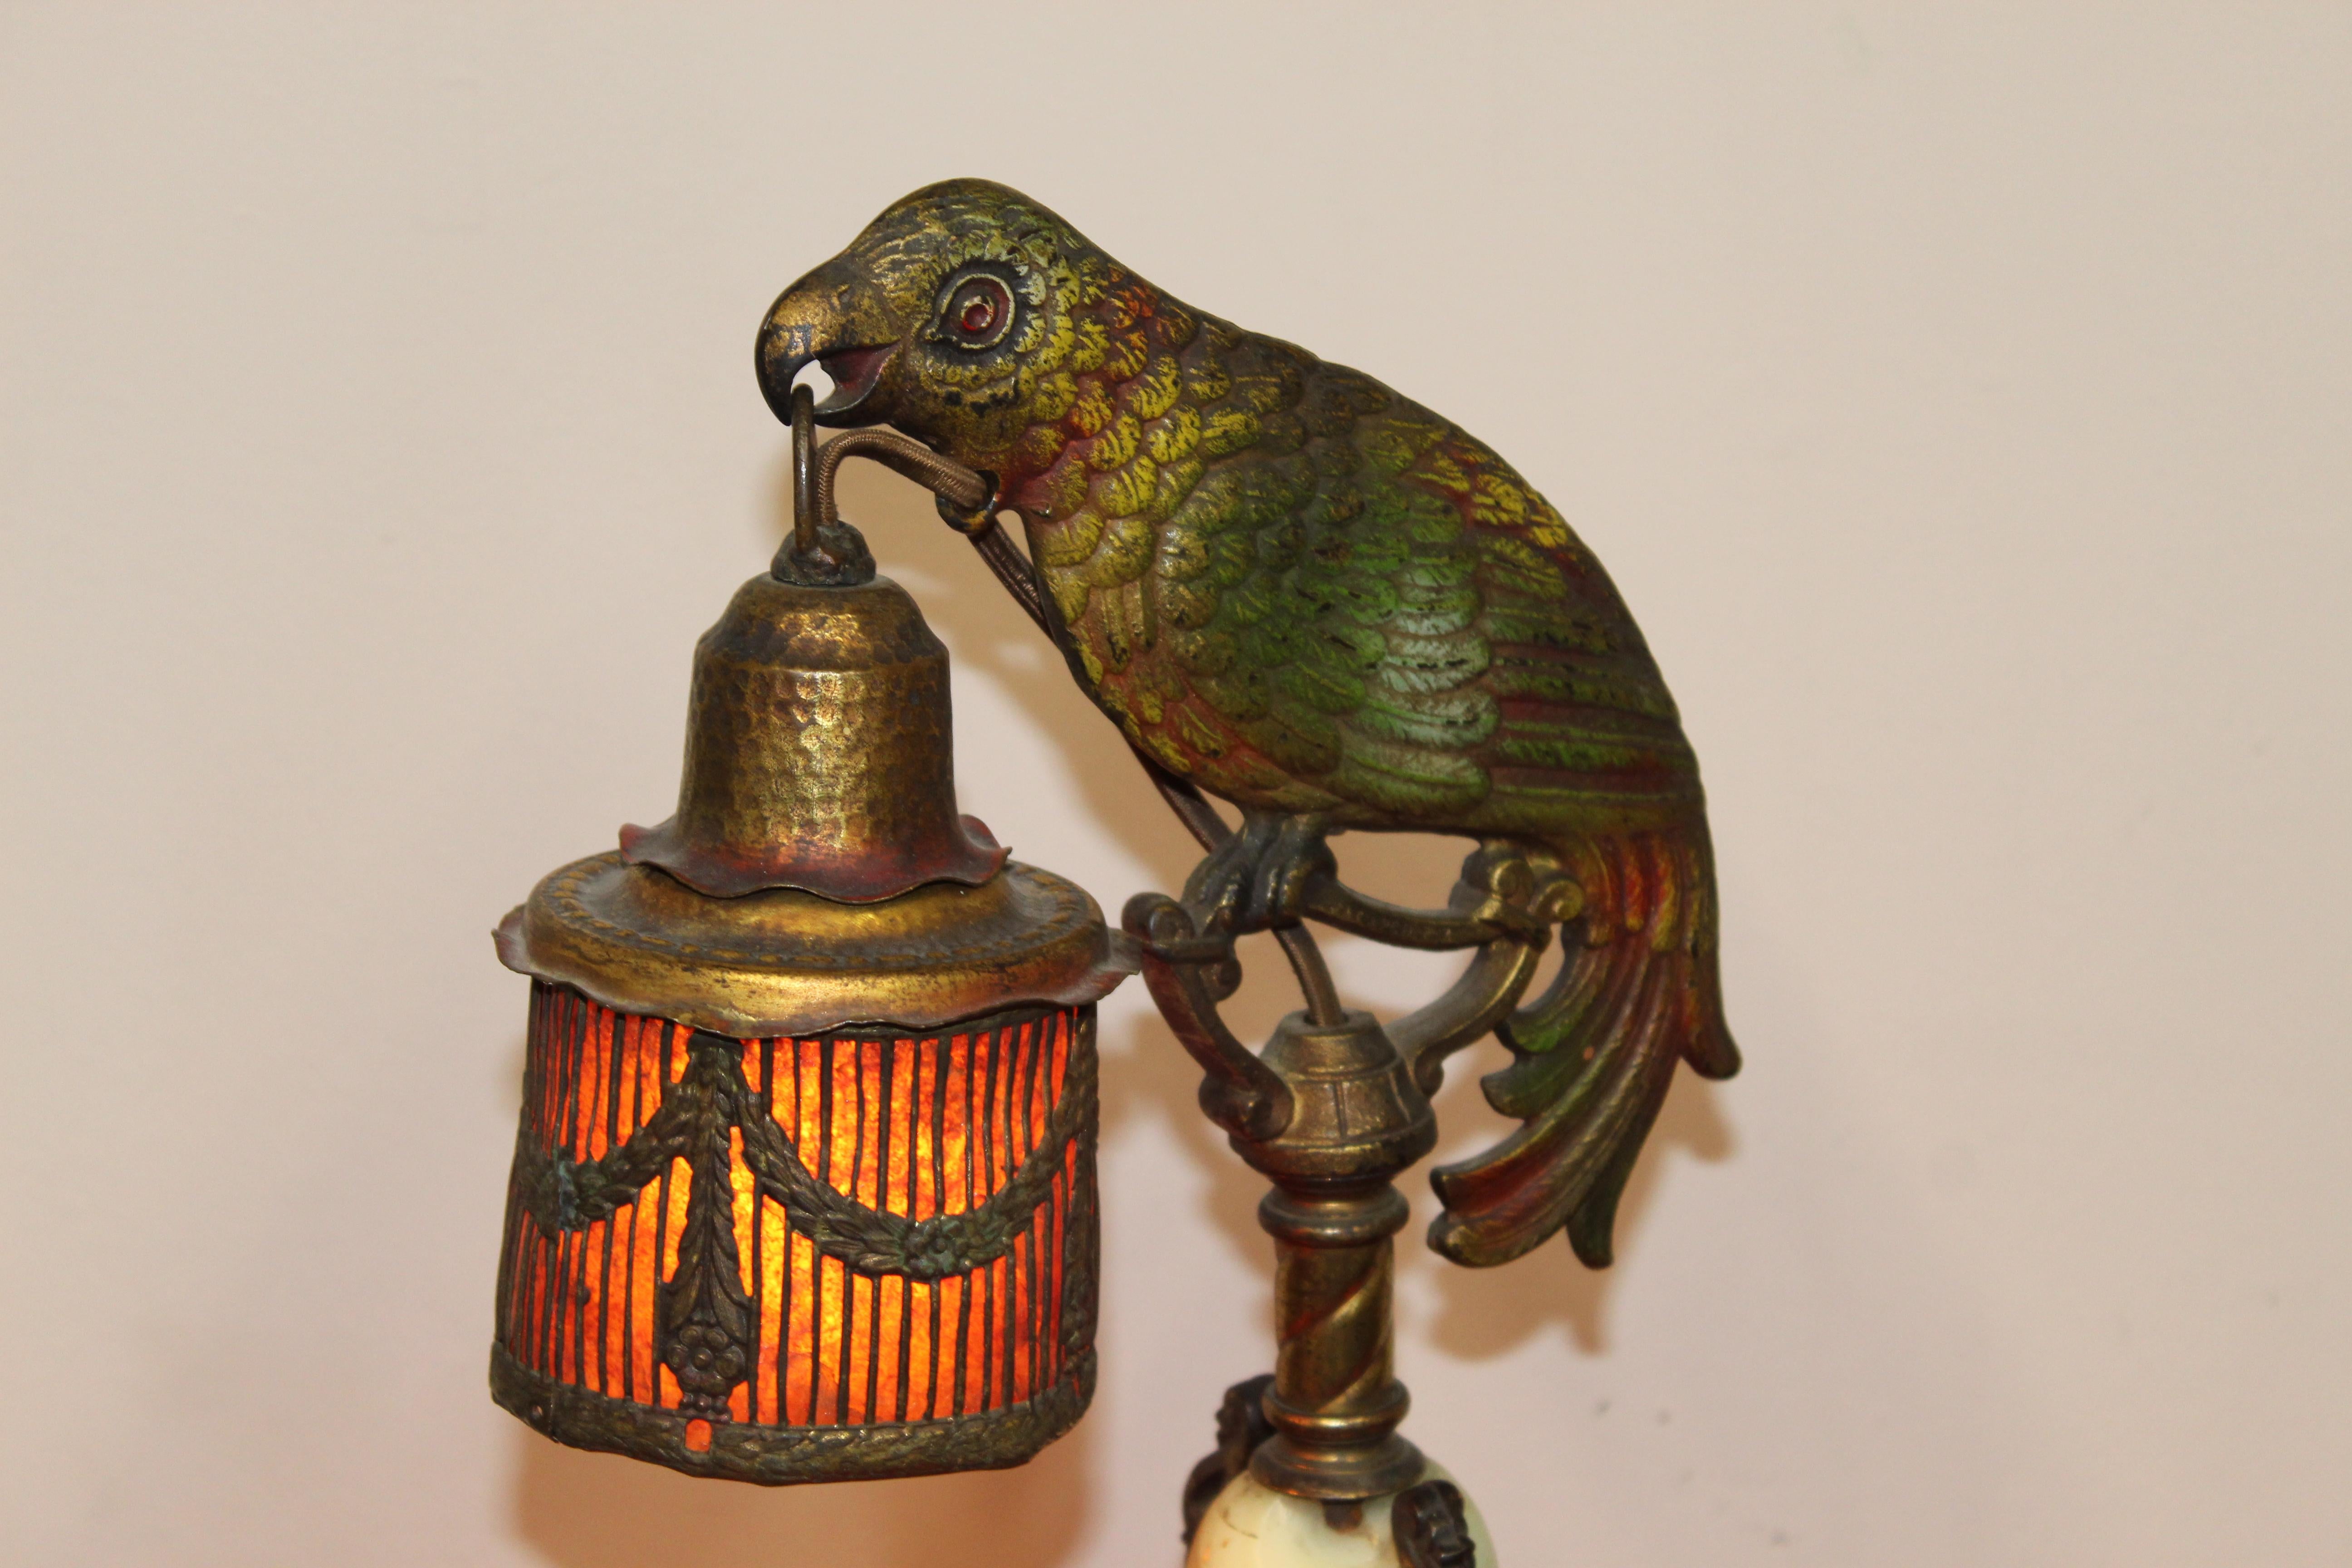 All original condition. Painted cast metal parrot lamp with a cage shade. Giant green onyx ball, which has a crack on one side near the top. This lovely, antique parrot lamp is a proposition for all vintage enthusiasts. Over all in good original